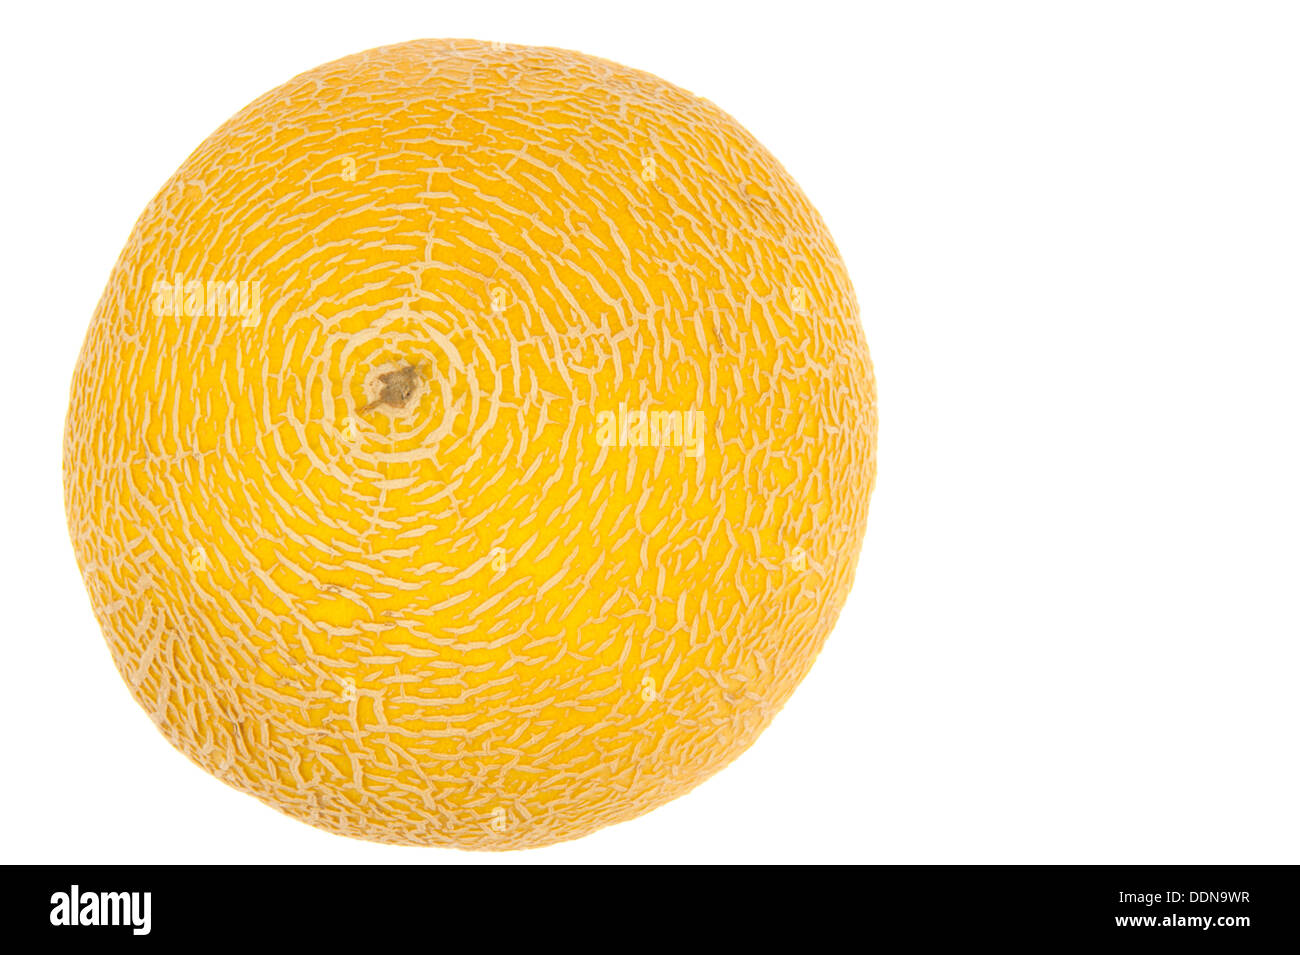 The concentric shaped ribbed skin of a yellow melon isolated in white Stock Photo